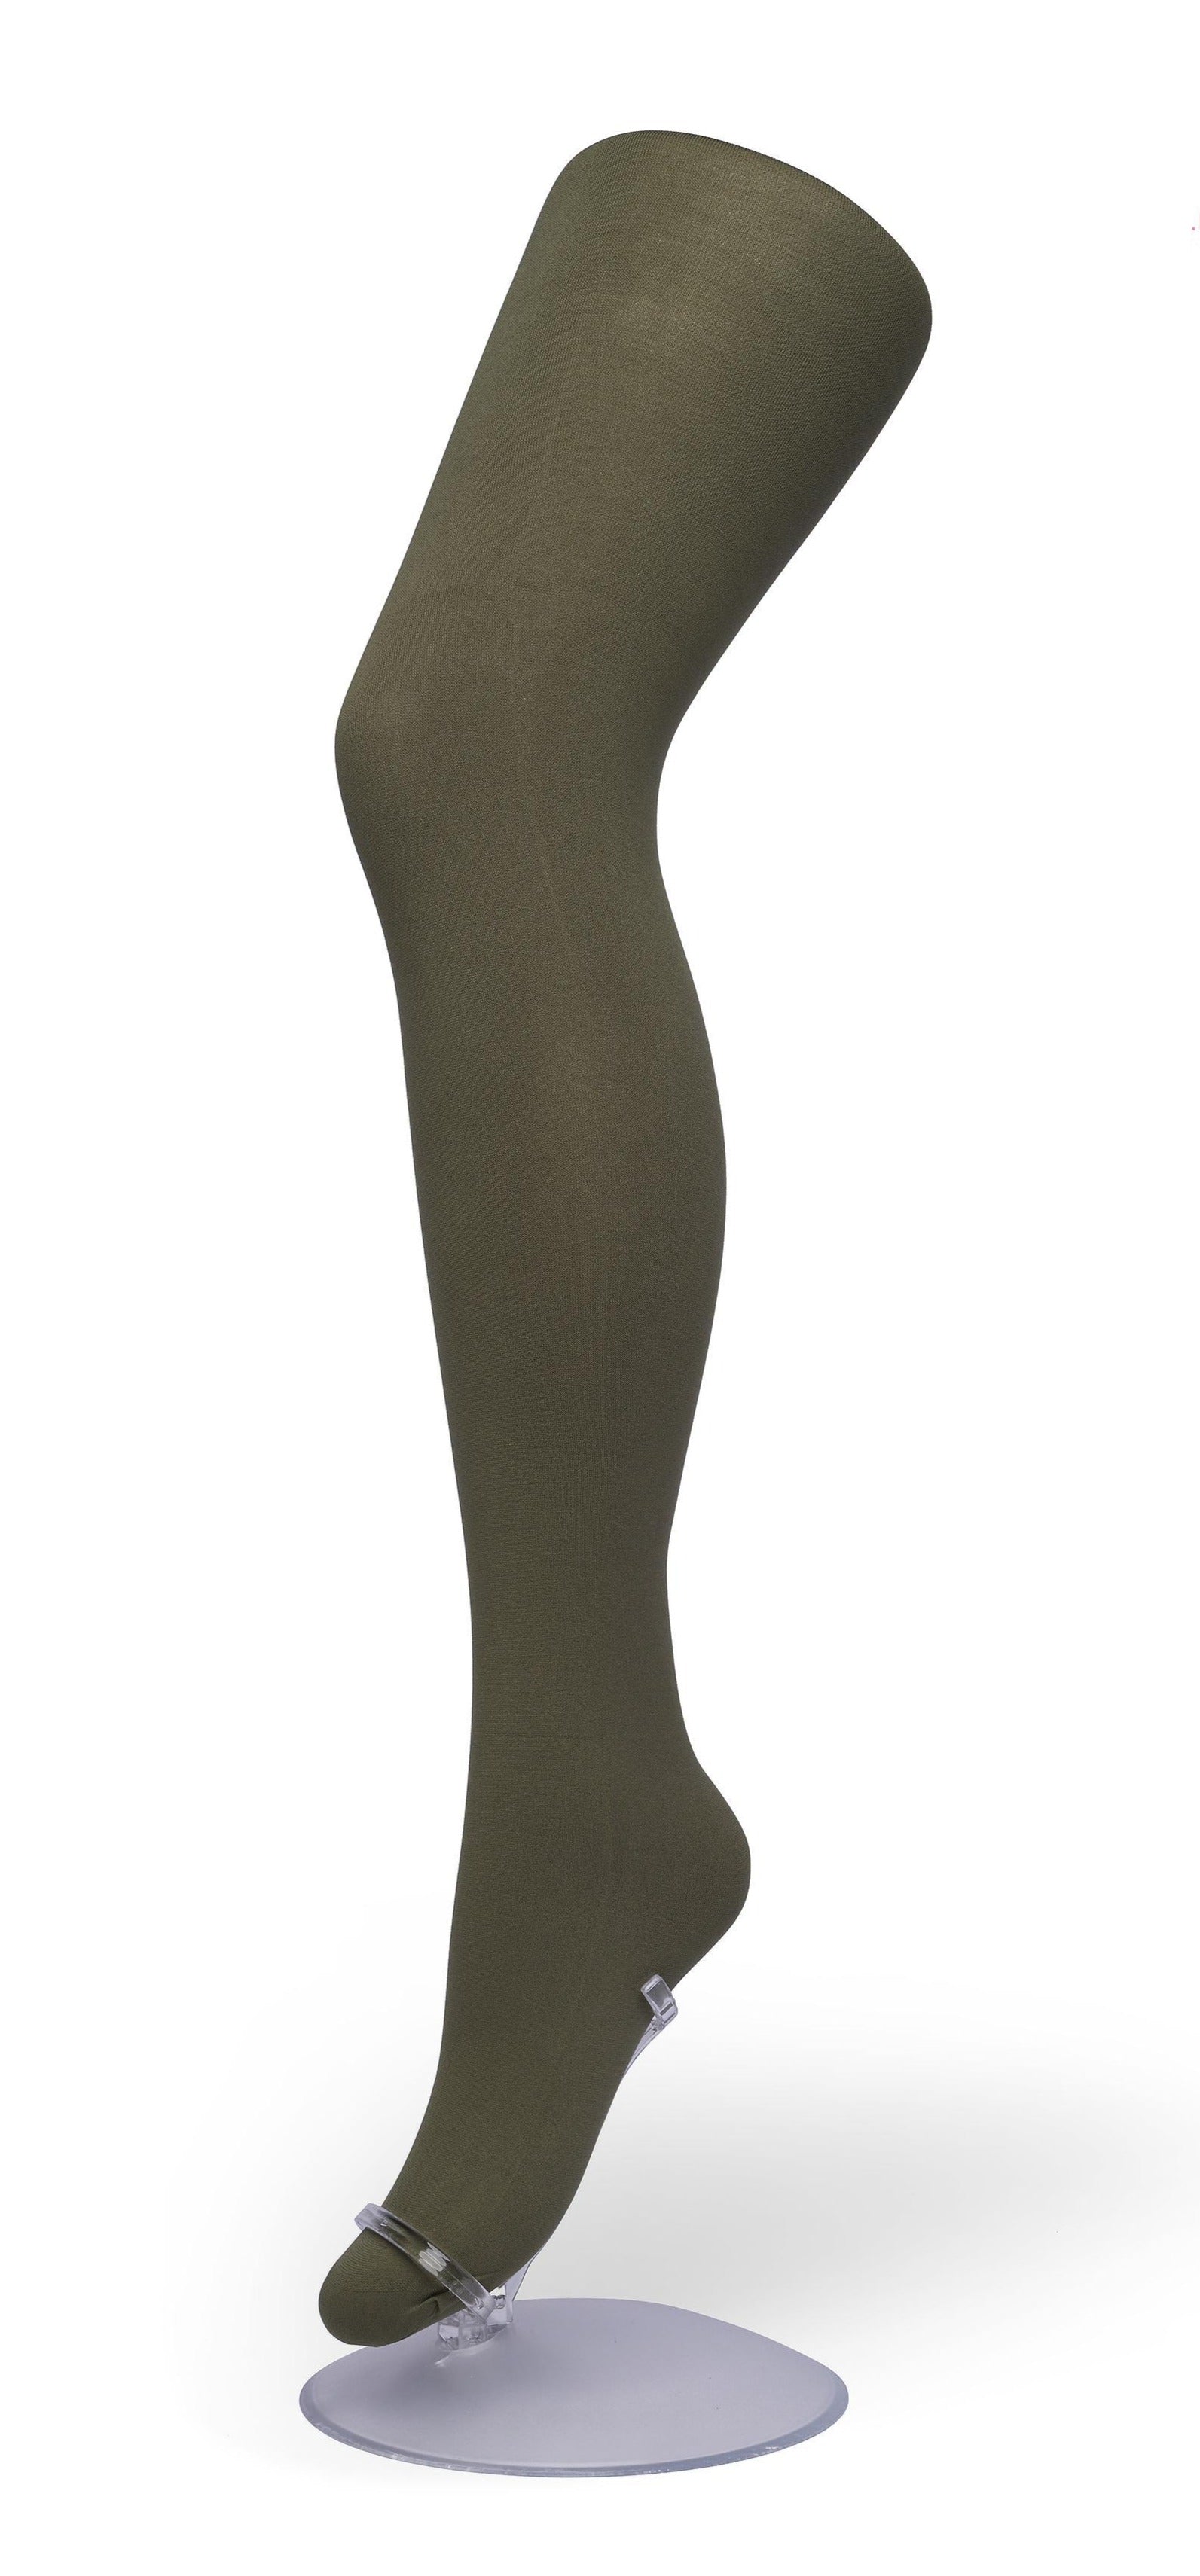 Bonnie Doon BN161912 Comfort Tights XXL - Khaki Green (olive) 70 denier soft opaque plus size tights with an extra panel in the body, extra deep waistband and flat seams.